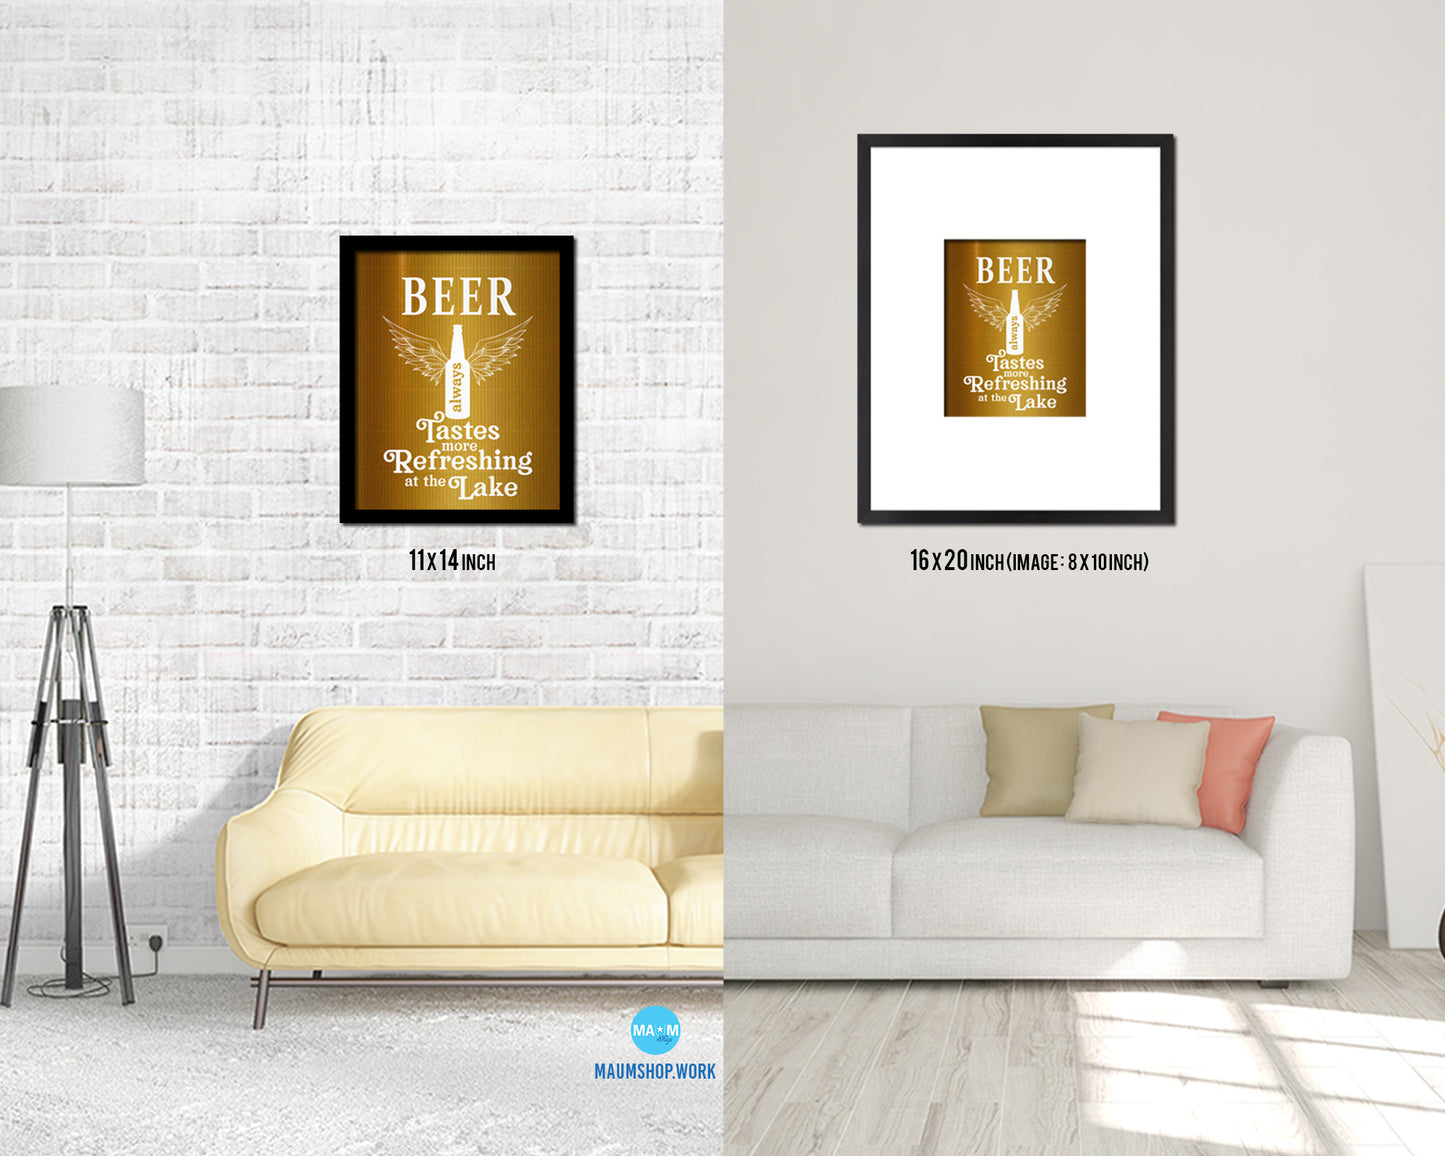 B*r always tastes more refreshing at the lake Quote Framed Print Wall Decor Art Gifts